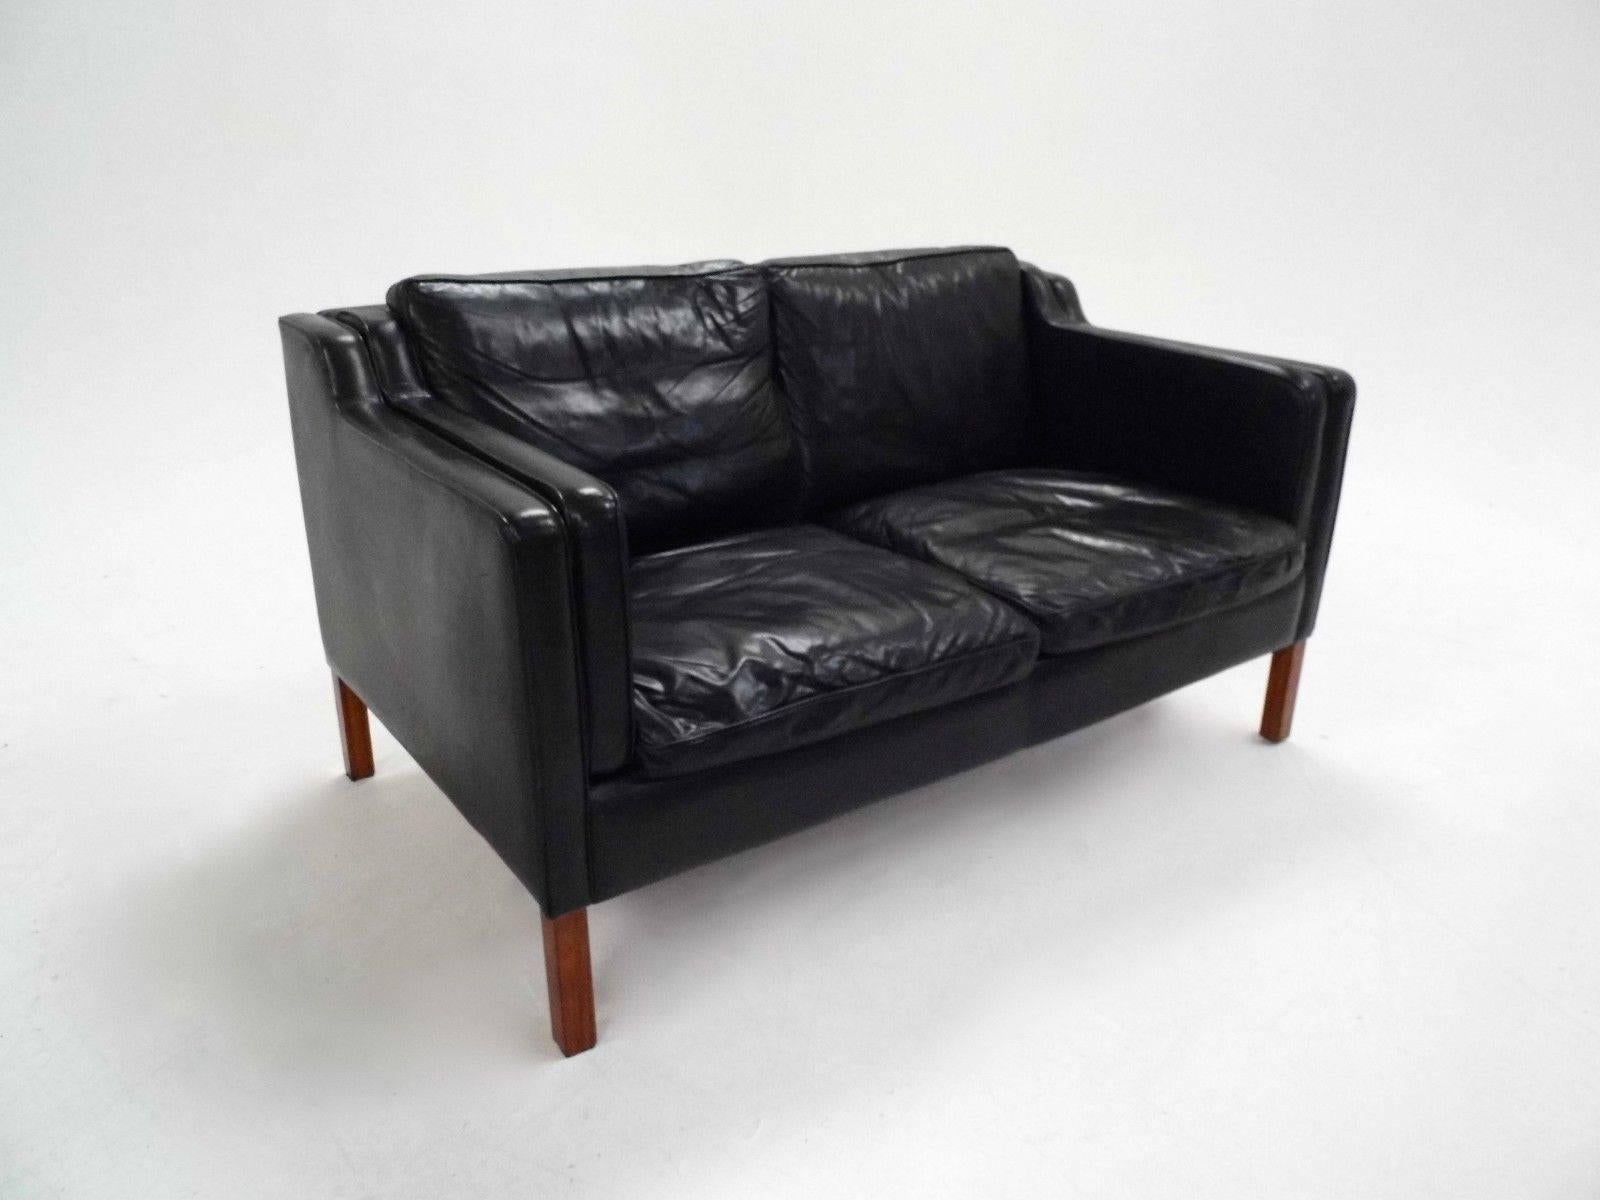 A beautiful Danish black leather two-seat sofa by Stouby, this would make a stylish addition to any living or work area. The sofa has wide cushions and sculptured padded armrests for enhanced comfort. A striking piece of Classic Scandinavian